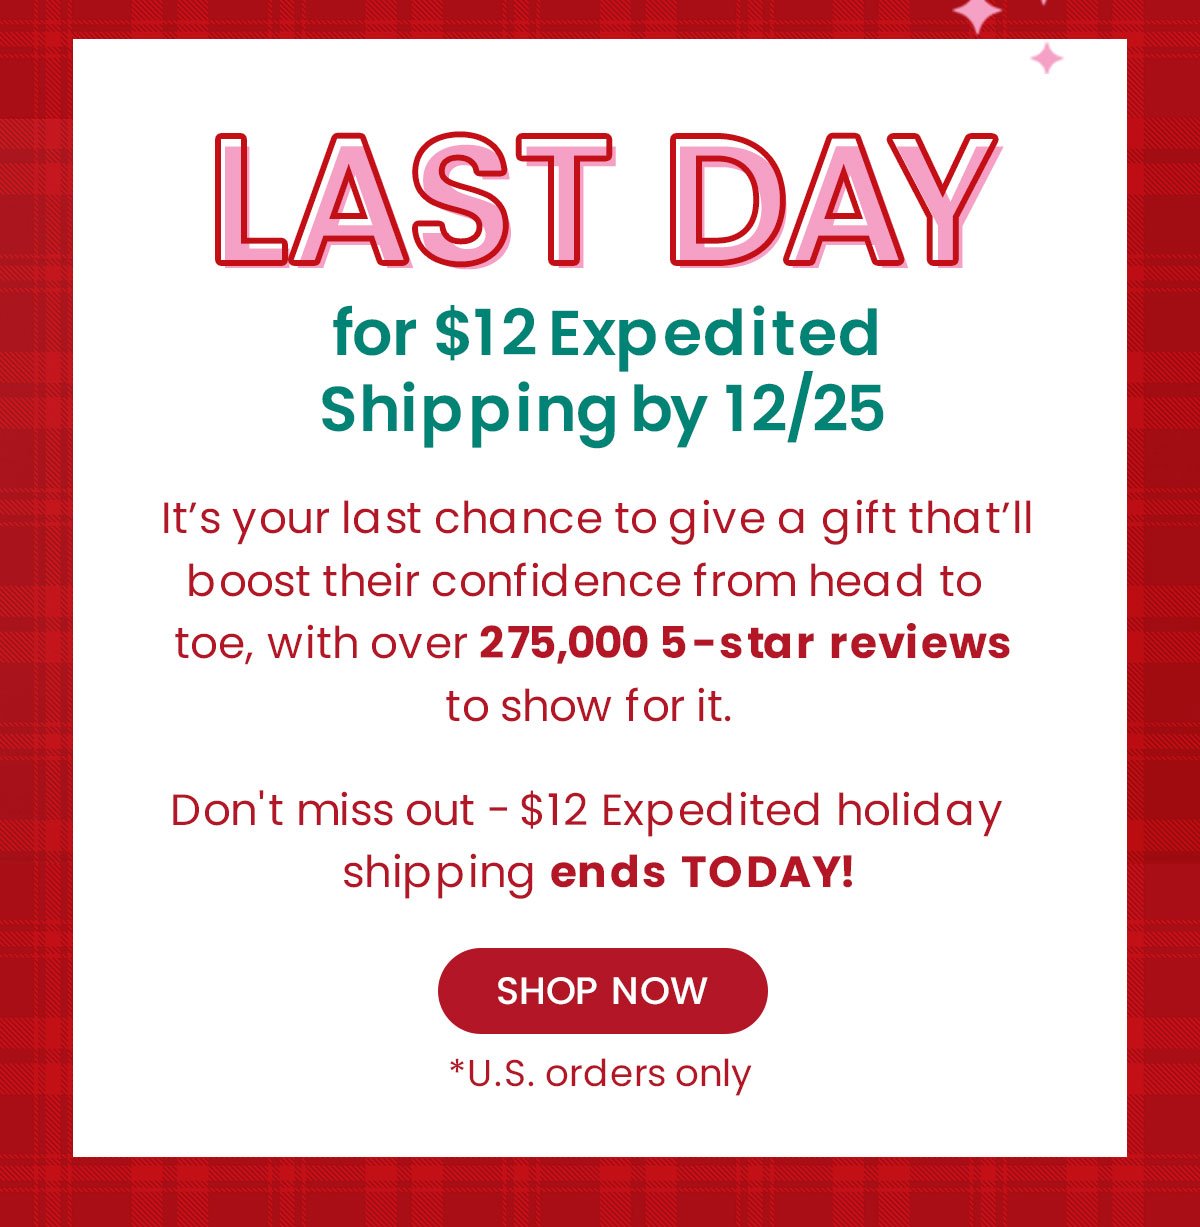 LAST DAY for \\$12 Expedited Shipping by 12/25